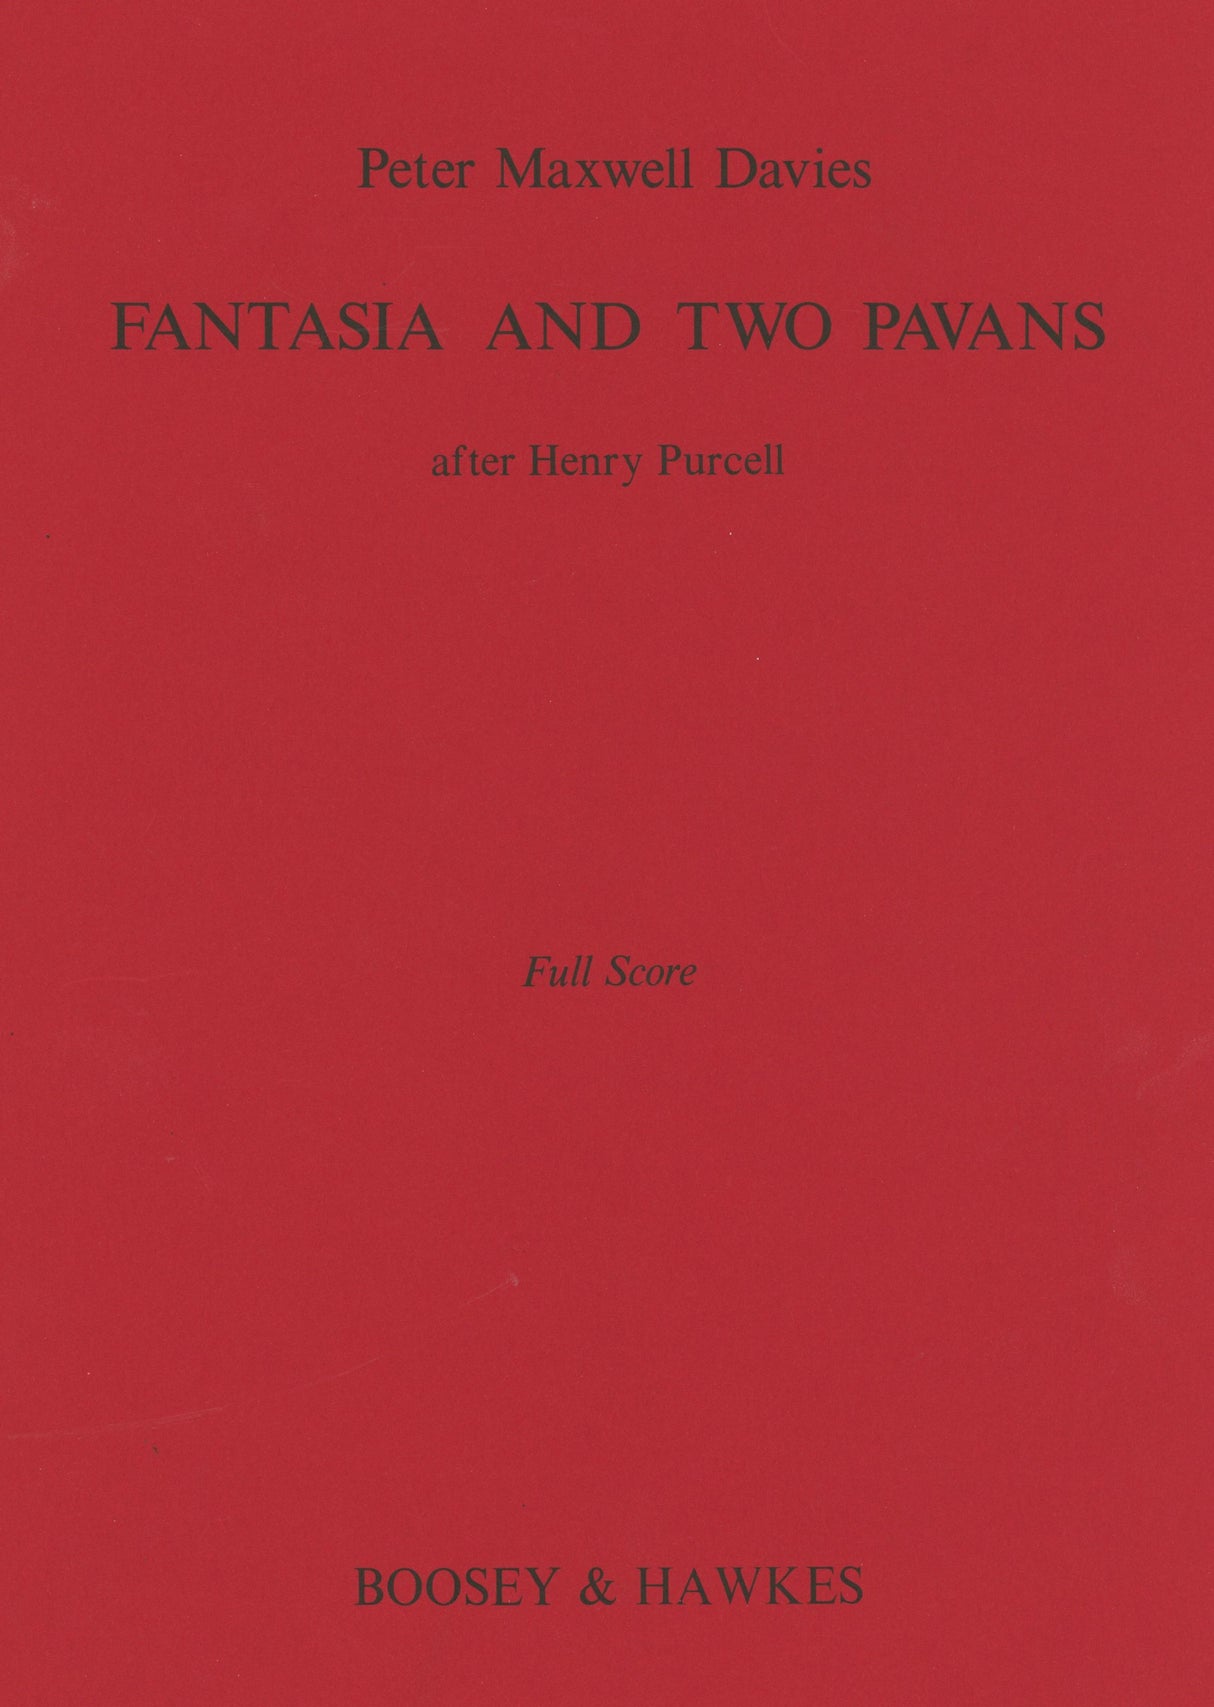 Davies: Fantasia and 2 Pavans after Henry Purcell